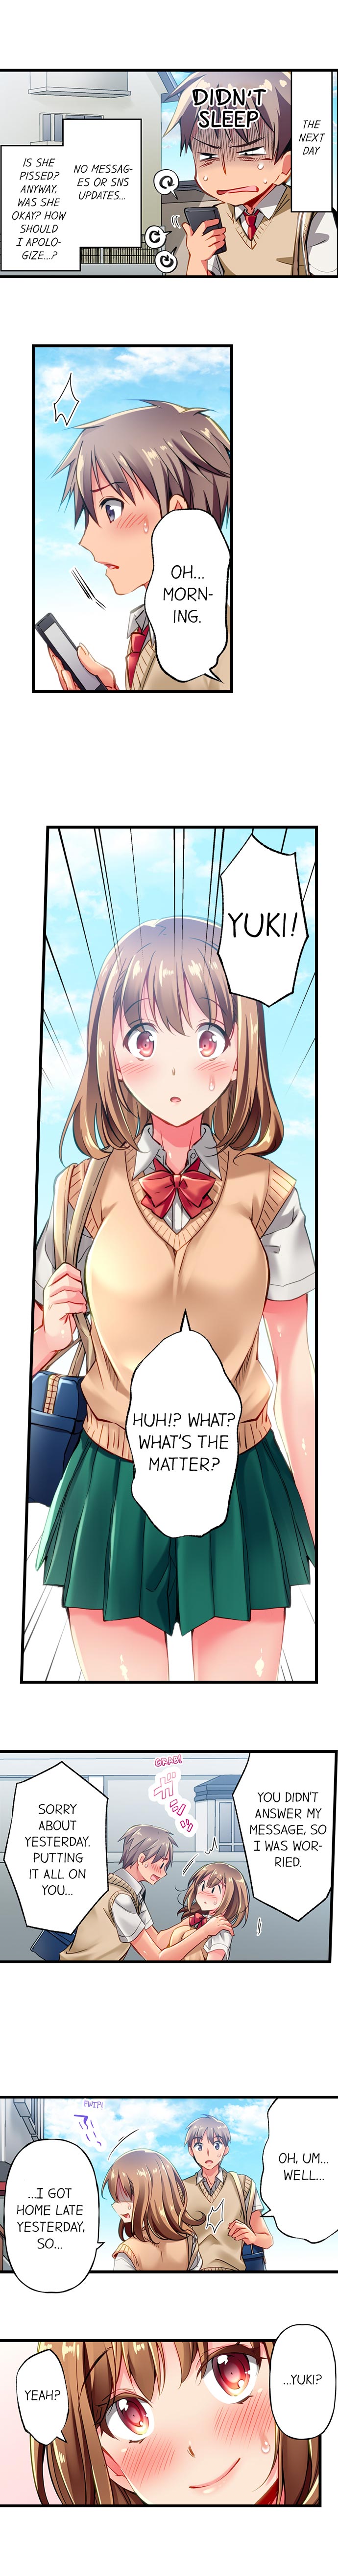 [Momoshika Fujiko] Only i Know Her Cumming Face Ch. 1 - 11 (Ongoing) [English] page 12 full